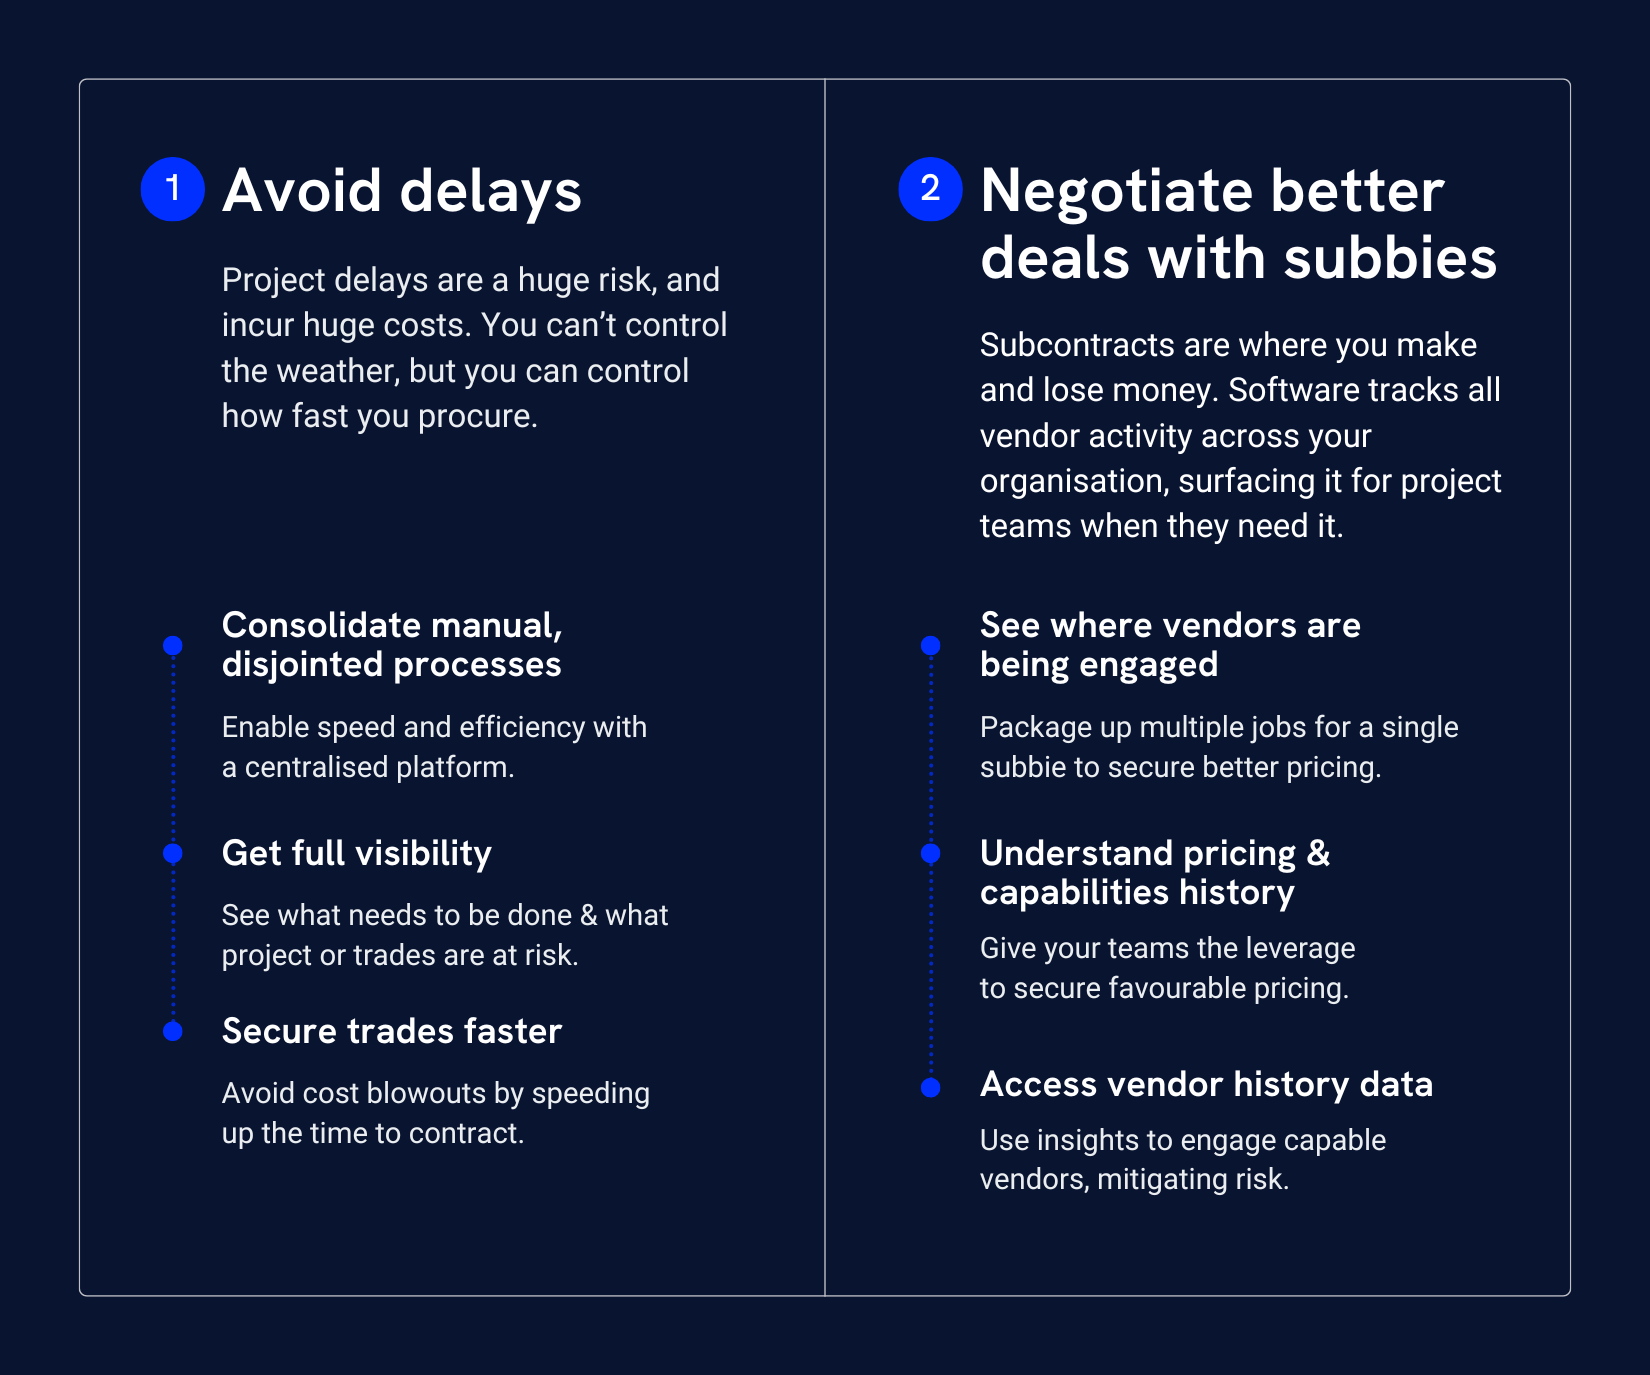 A graphic split into two columns detailing how procurement software reduces costs, 1. Avoid delays, and 2. Negotiate better deals with subbies. 